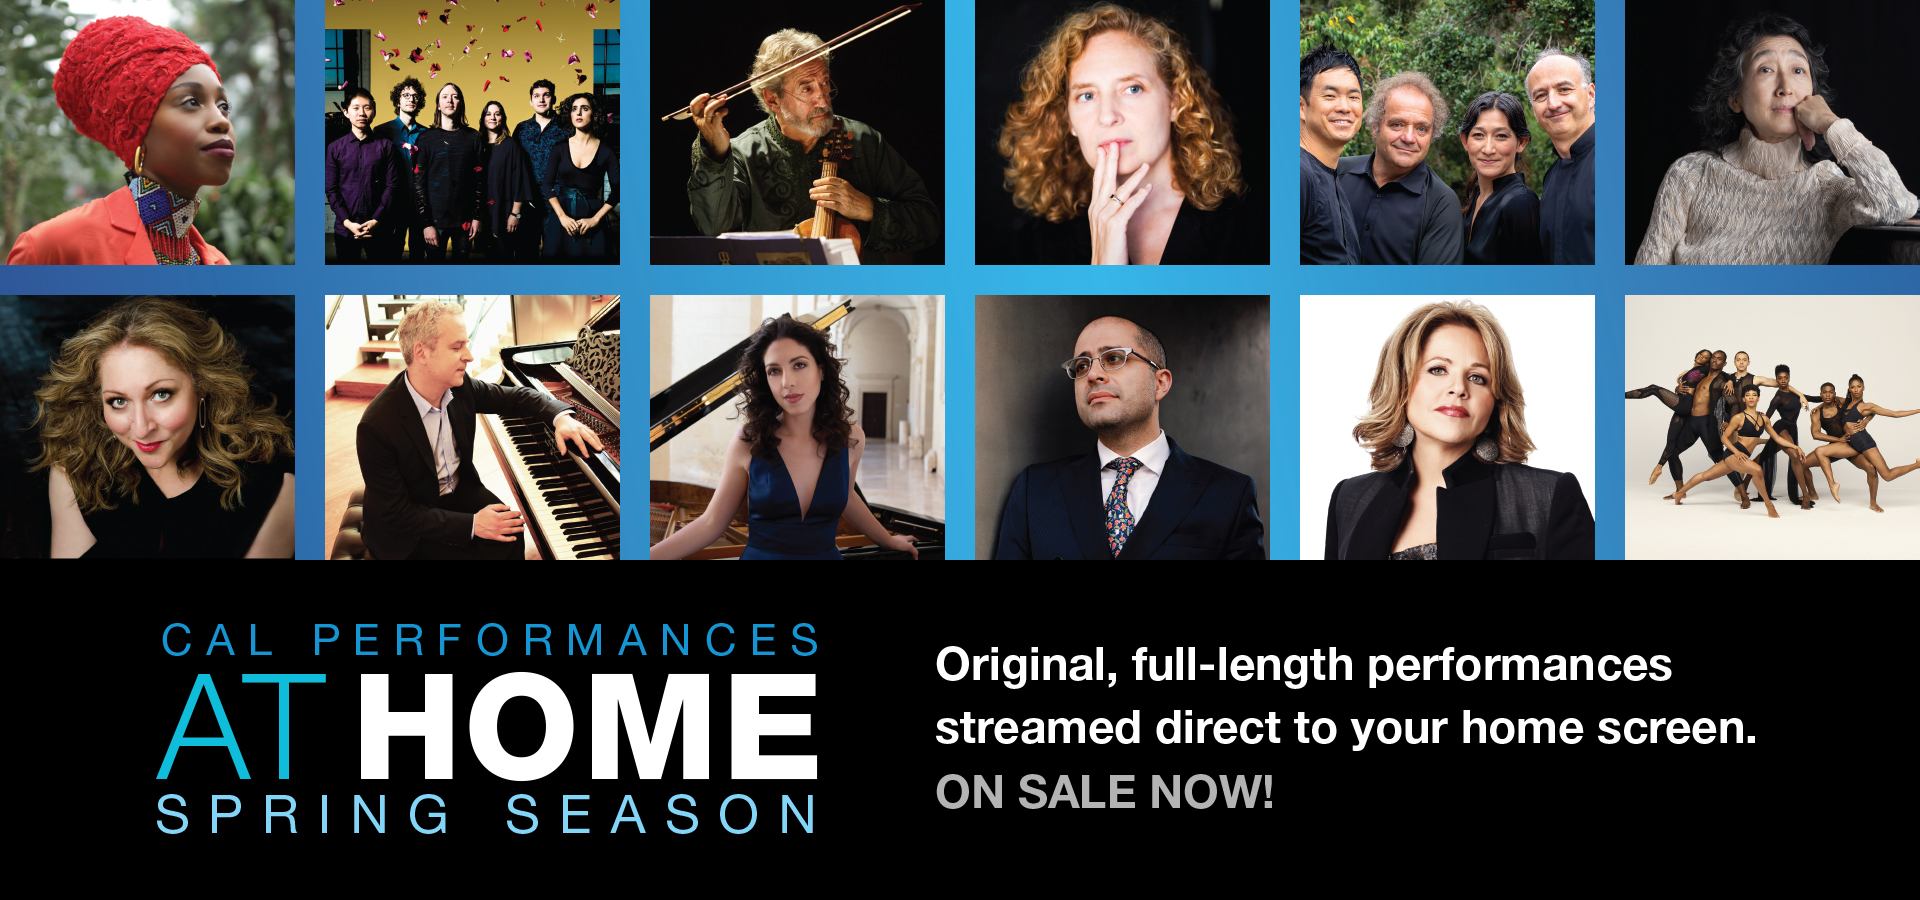 Cal Performances at Home Spring Season: Original, full-length performances streamed direct to your home screen